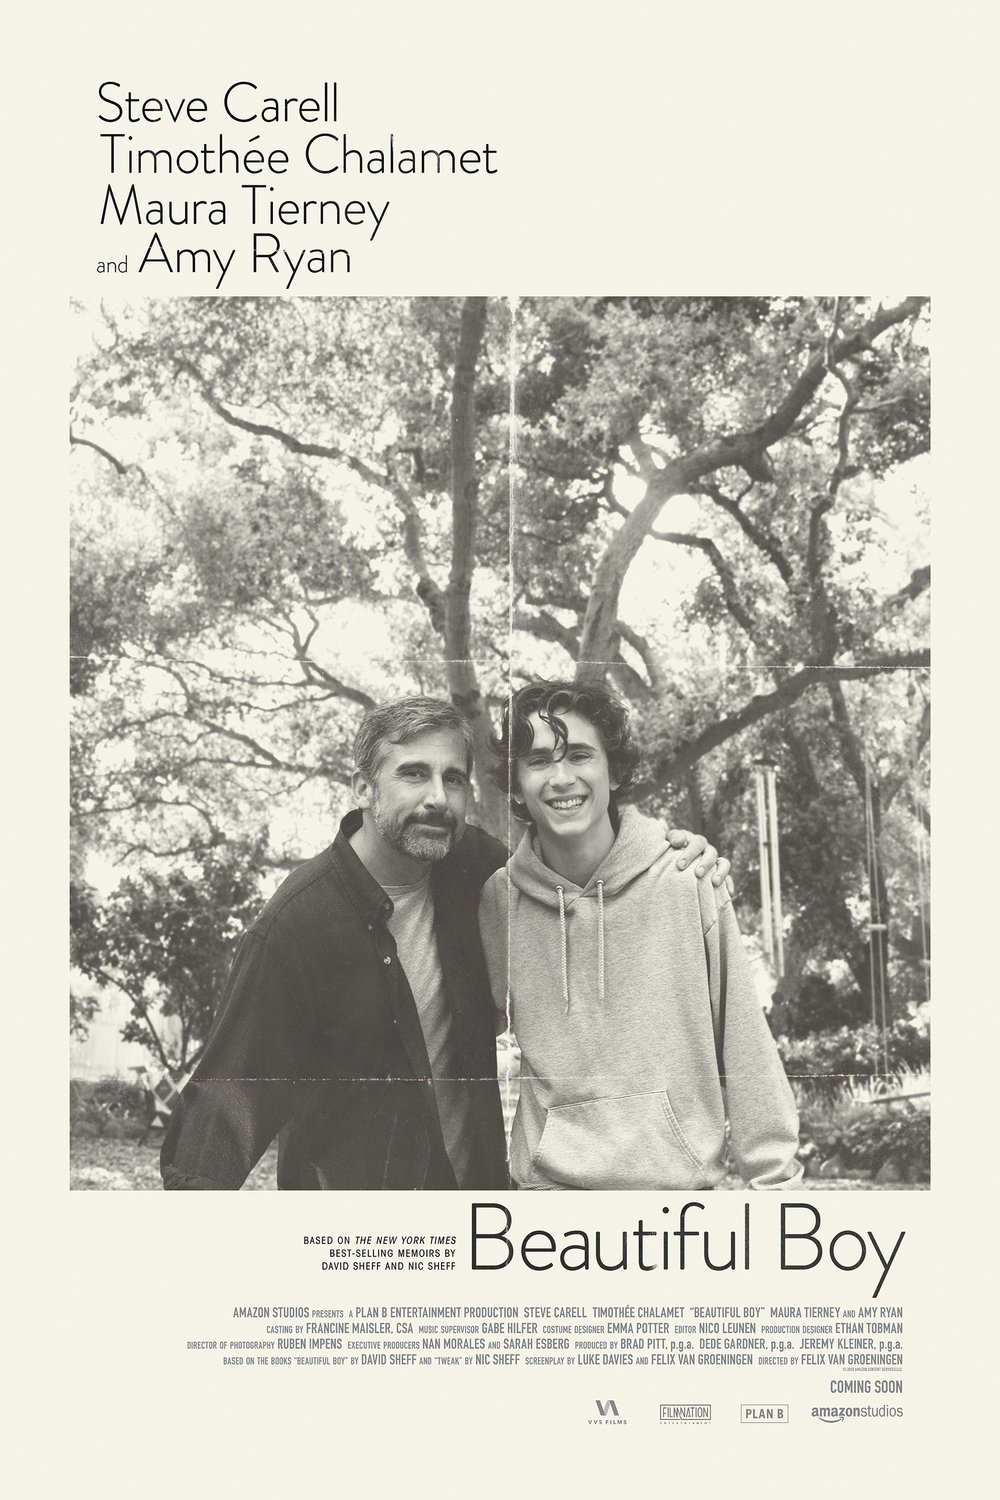 Poster of the movie Beautiful Boy